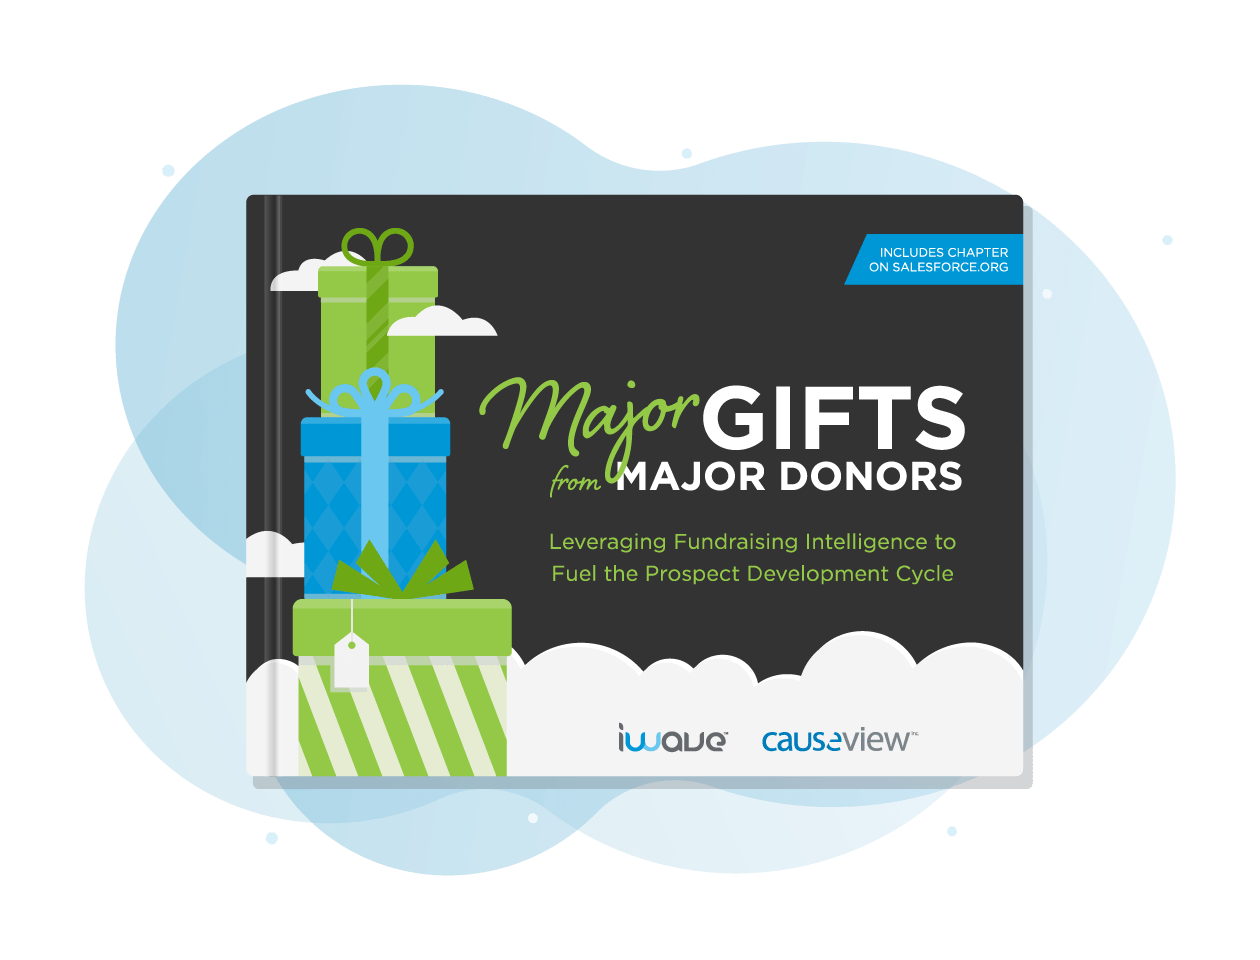 Major Gifts from Major Donors